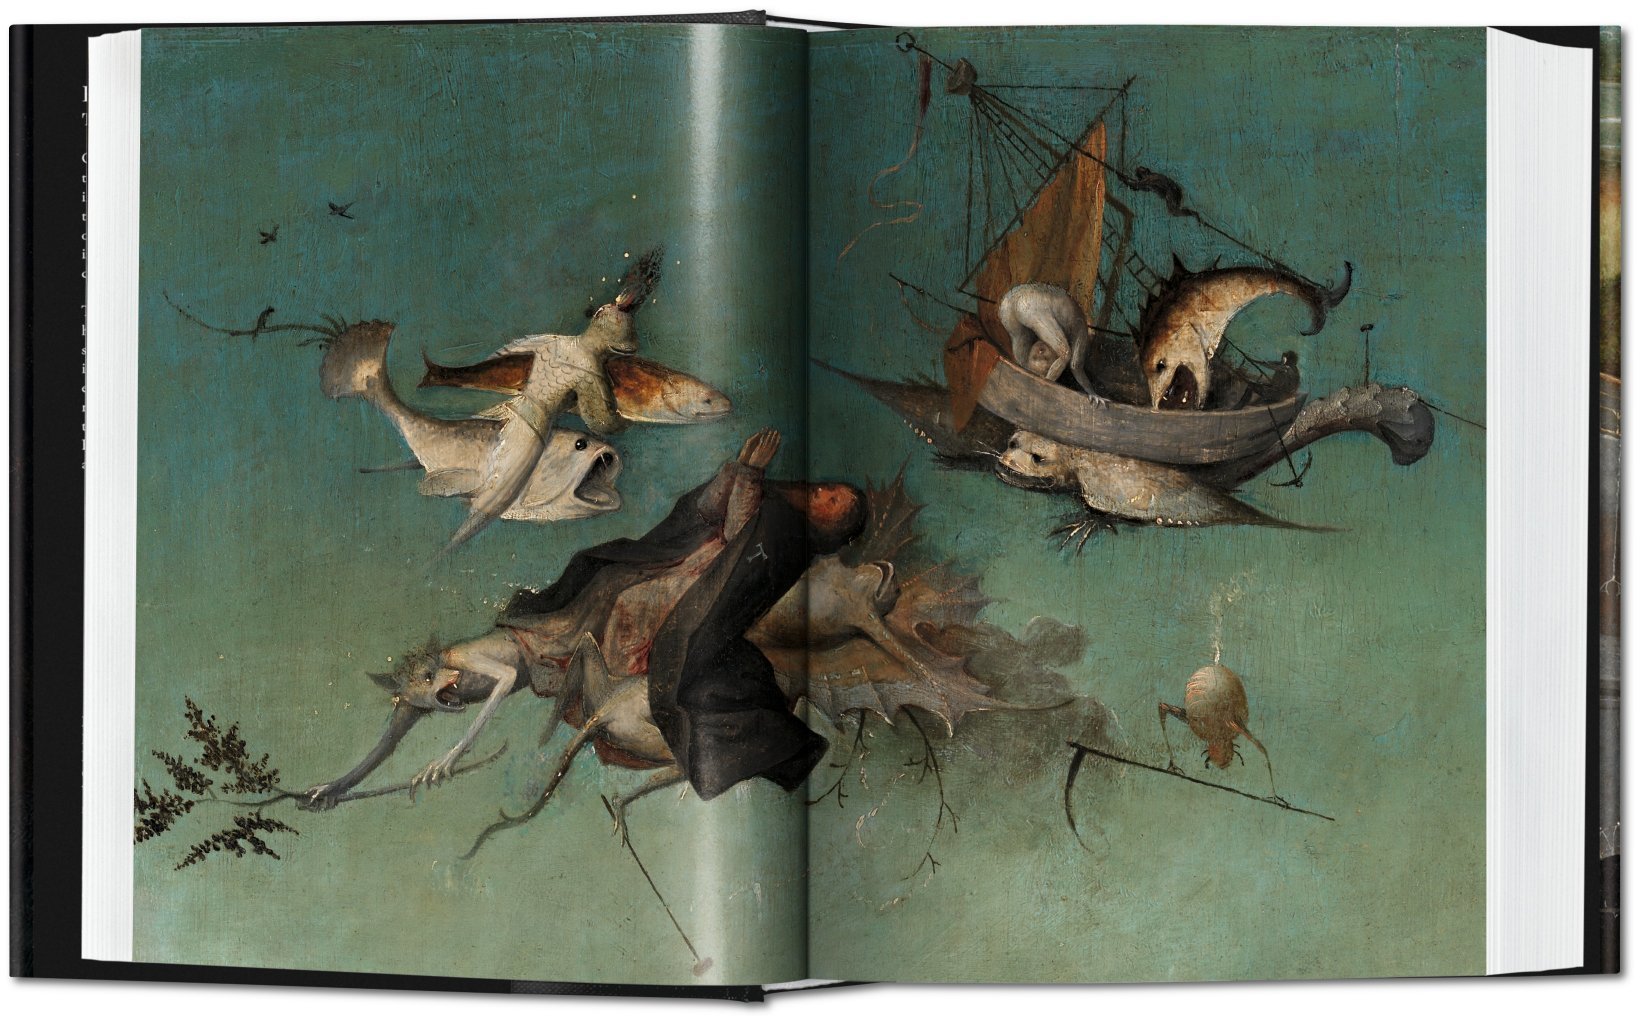 hieronymus bosch the complete works